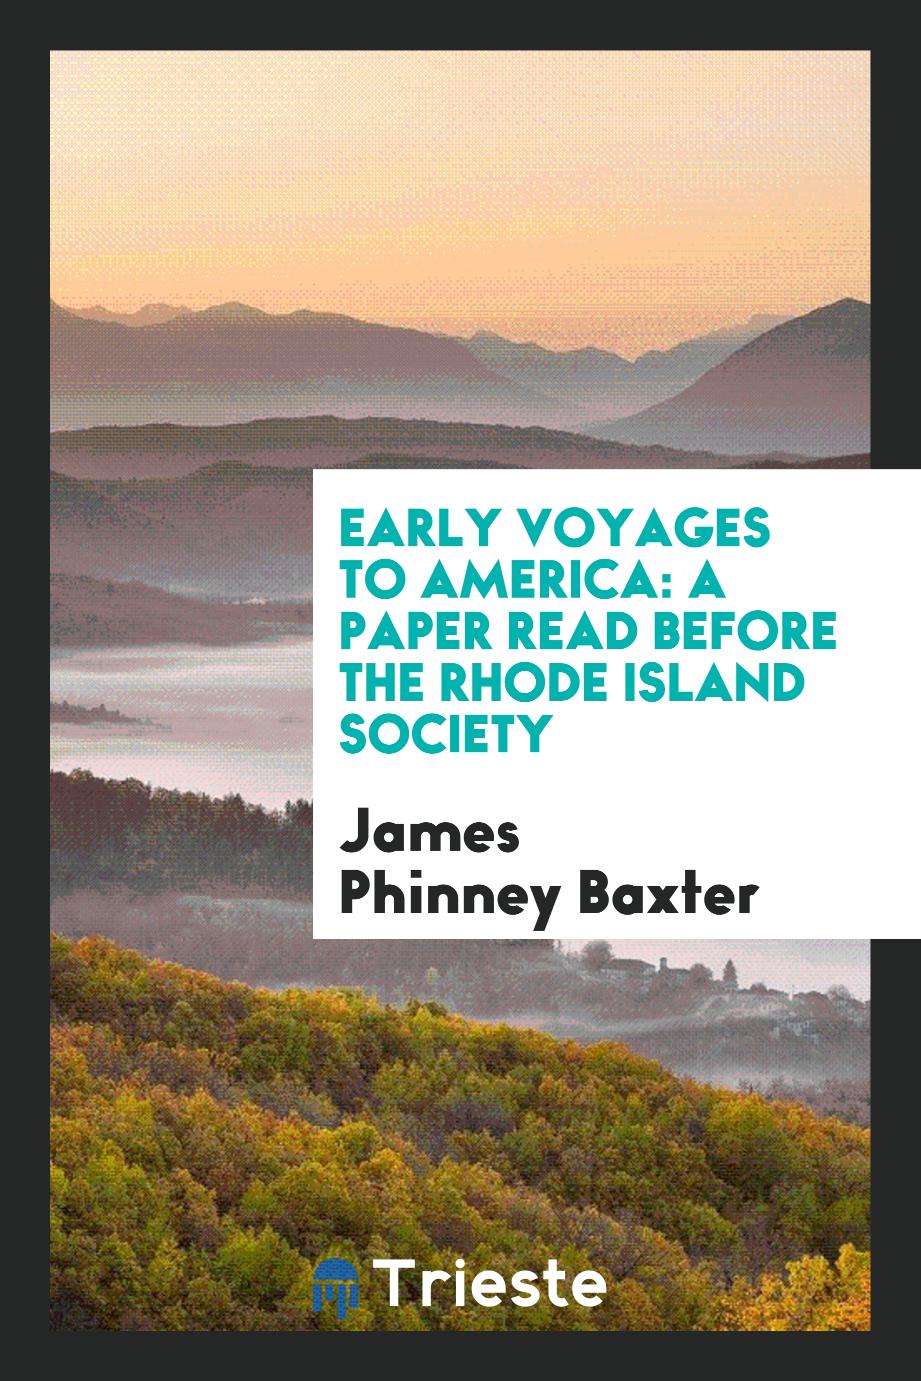 Early voyages to America: a paper read before the Rhode Island Society